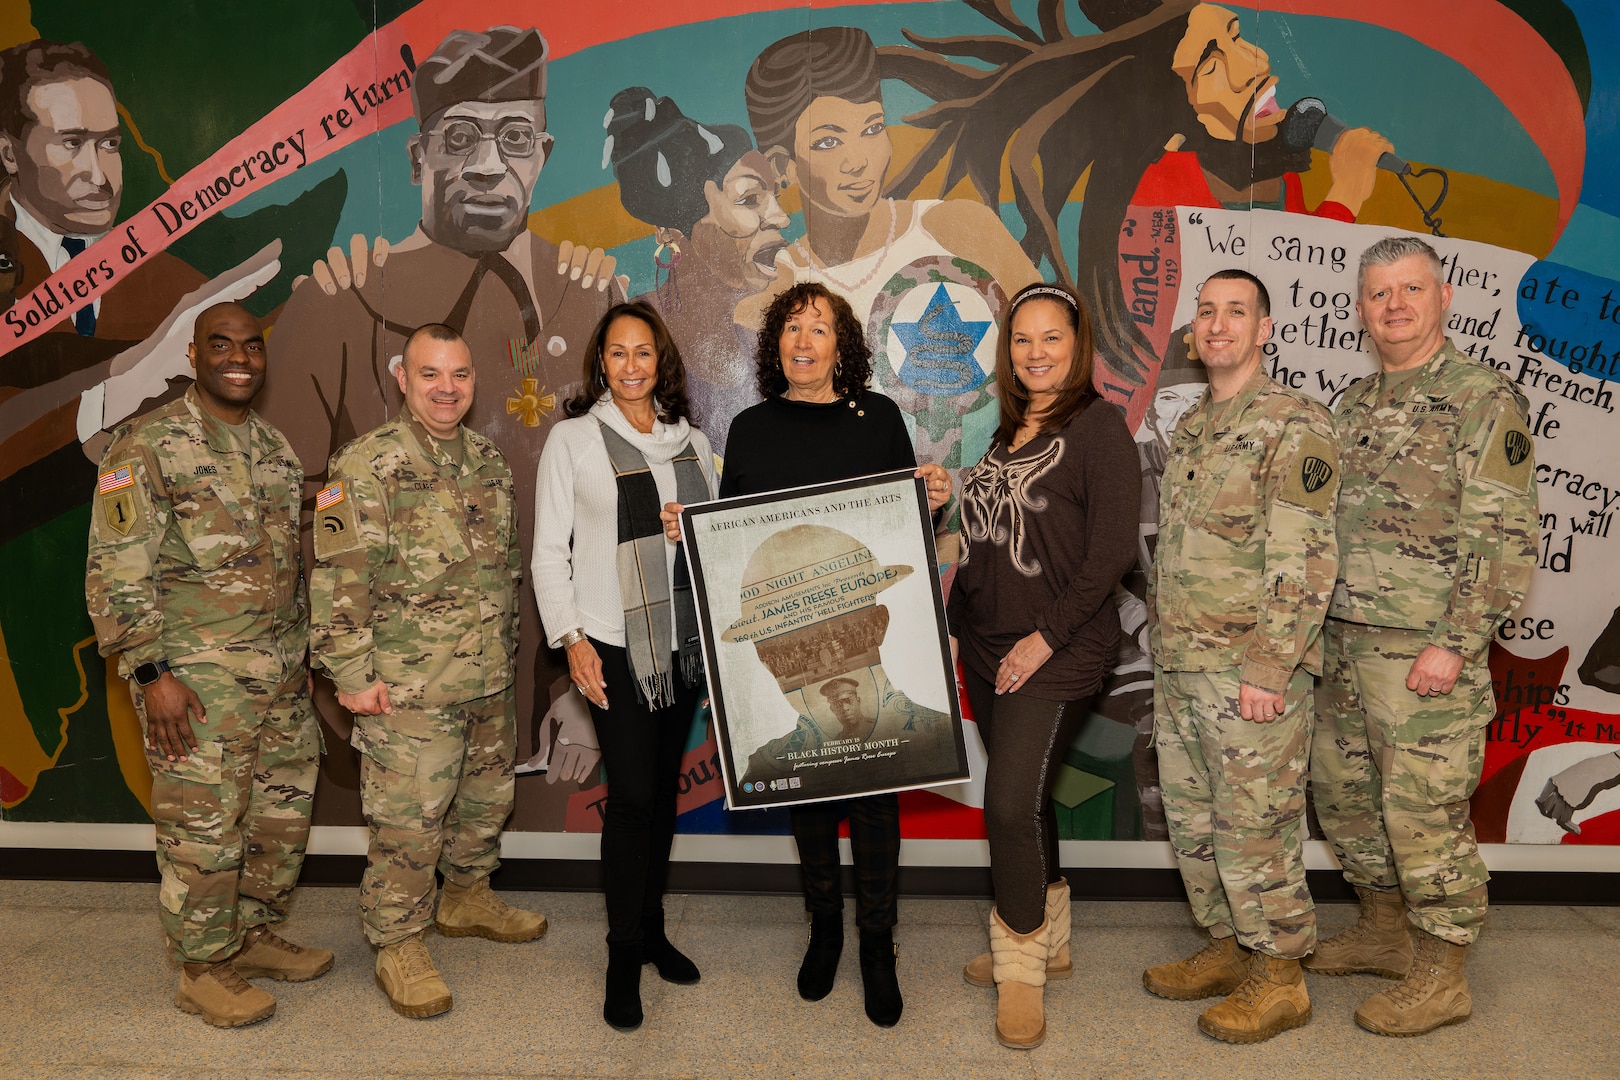 The granddaughters of legendary Harlem Hellfighter James Reese Europe — Patricia Europe Pearson, Lynn Europe Cotter, and Theresa Europe — pose with senior officers of the 369th Sustainment Brigade for a photo in front of a mural during a visit to the Harlem Regiment Armory in New York Feb. 24, 2024. They were given a tour of the armory by New York Army National Guard Command Sgt. Maj. Leyland Jones, Col. Patrick Clare, and Lt. Cols. David Myones and Peter Fish.